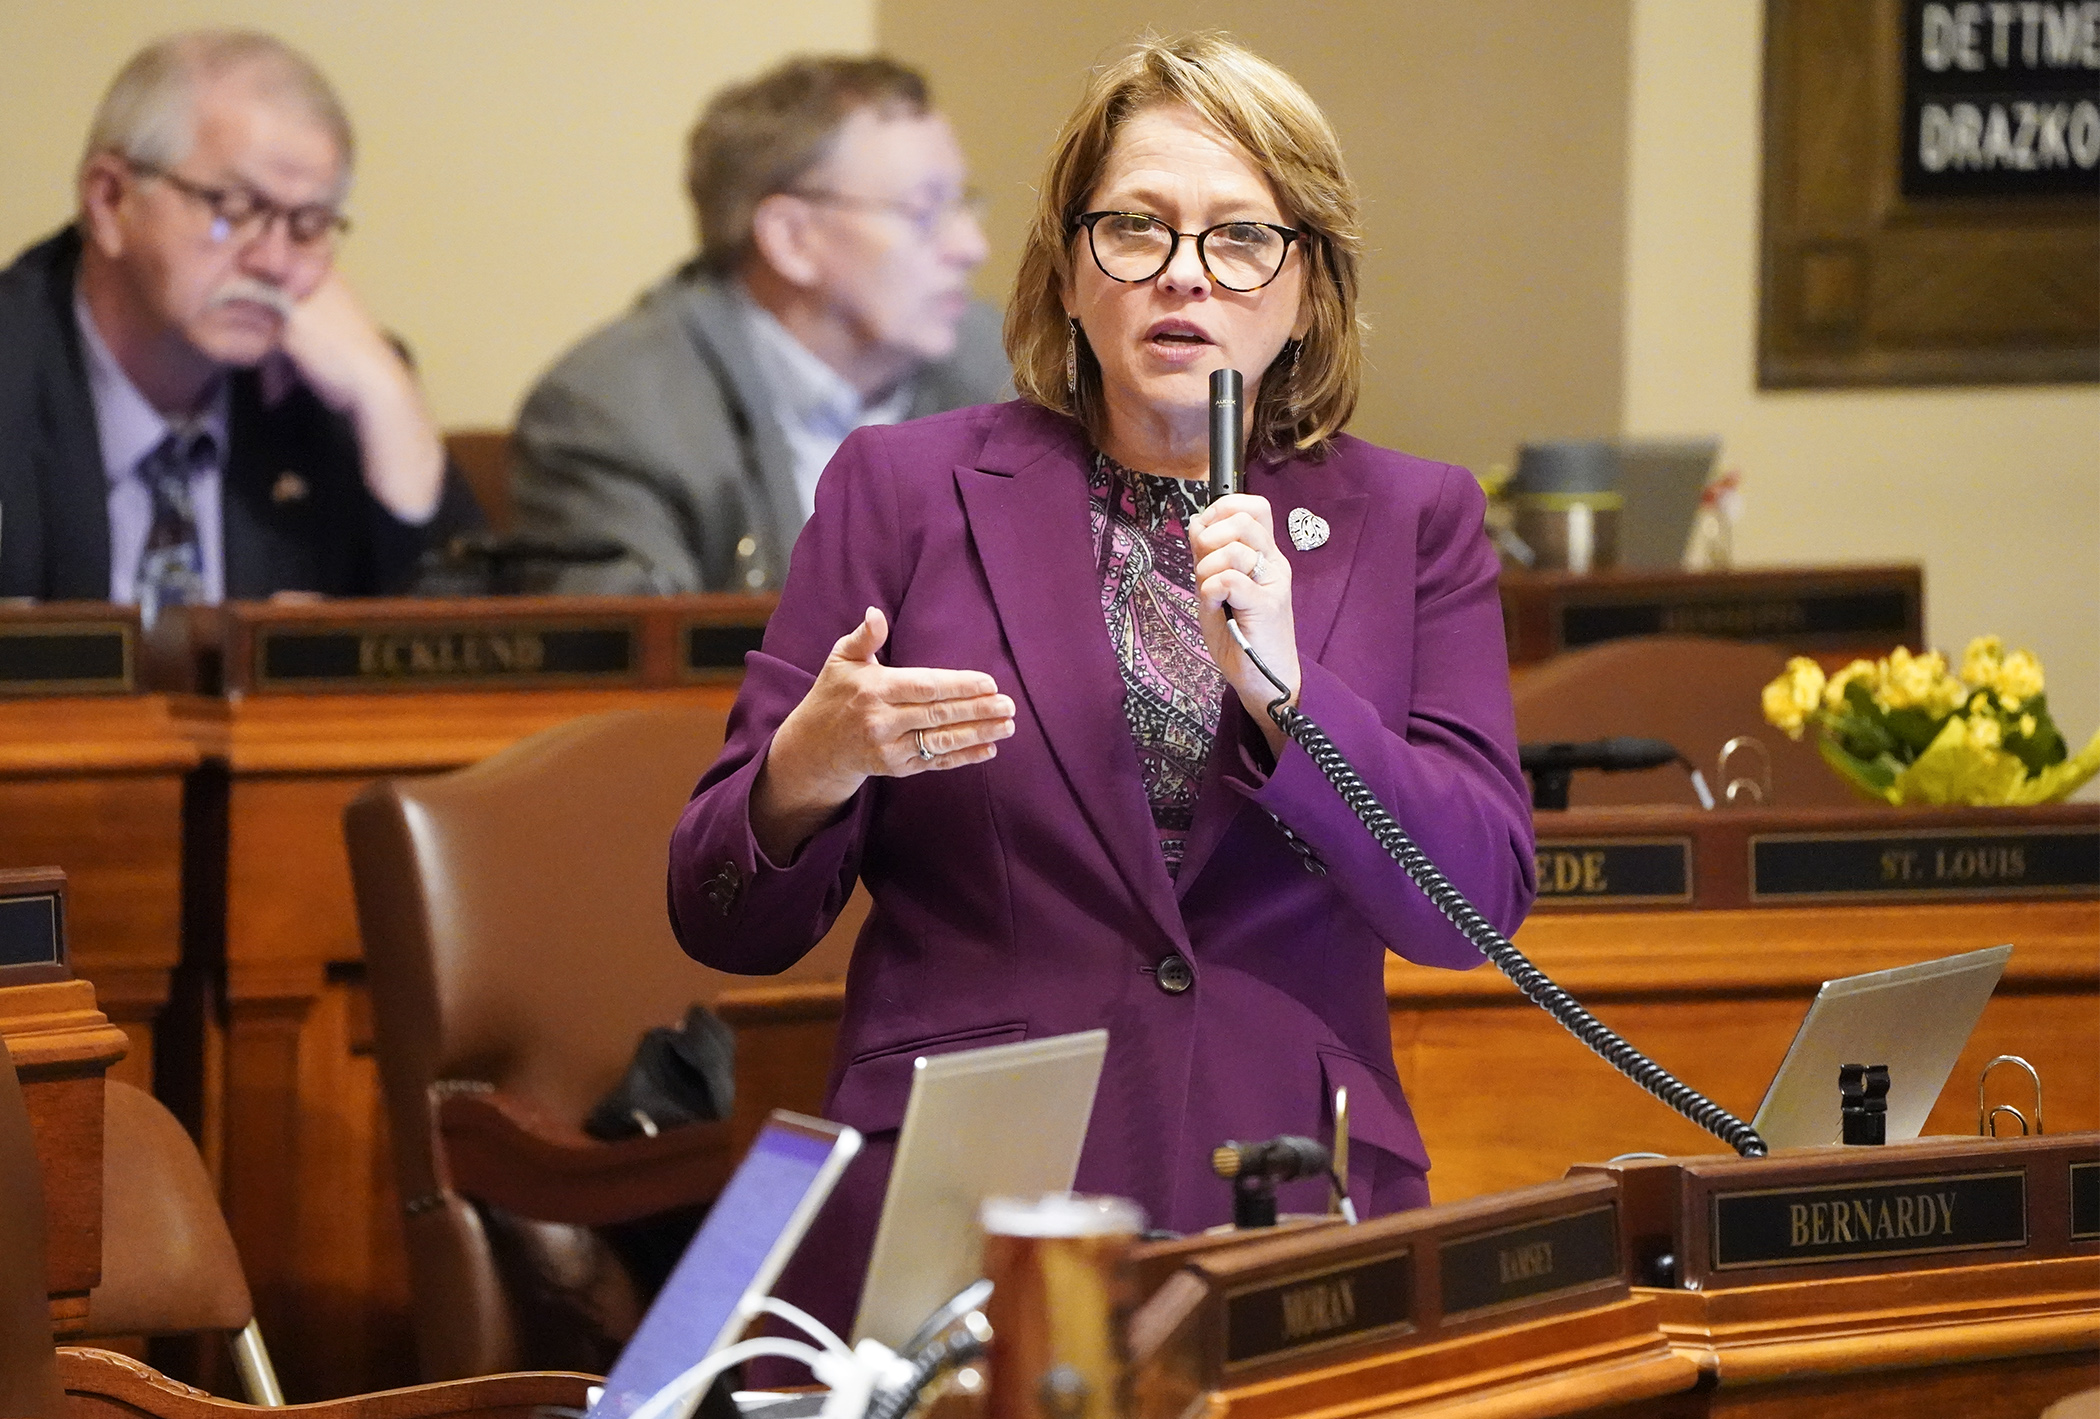 Rep. Connie Bernardy, chair of the House Higher Education Finance and Policy Committee, makes closing comments on HF3872, the omnibus higher education supplemental finance and policy bill April 29. (Photo by Paul Battaglia)